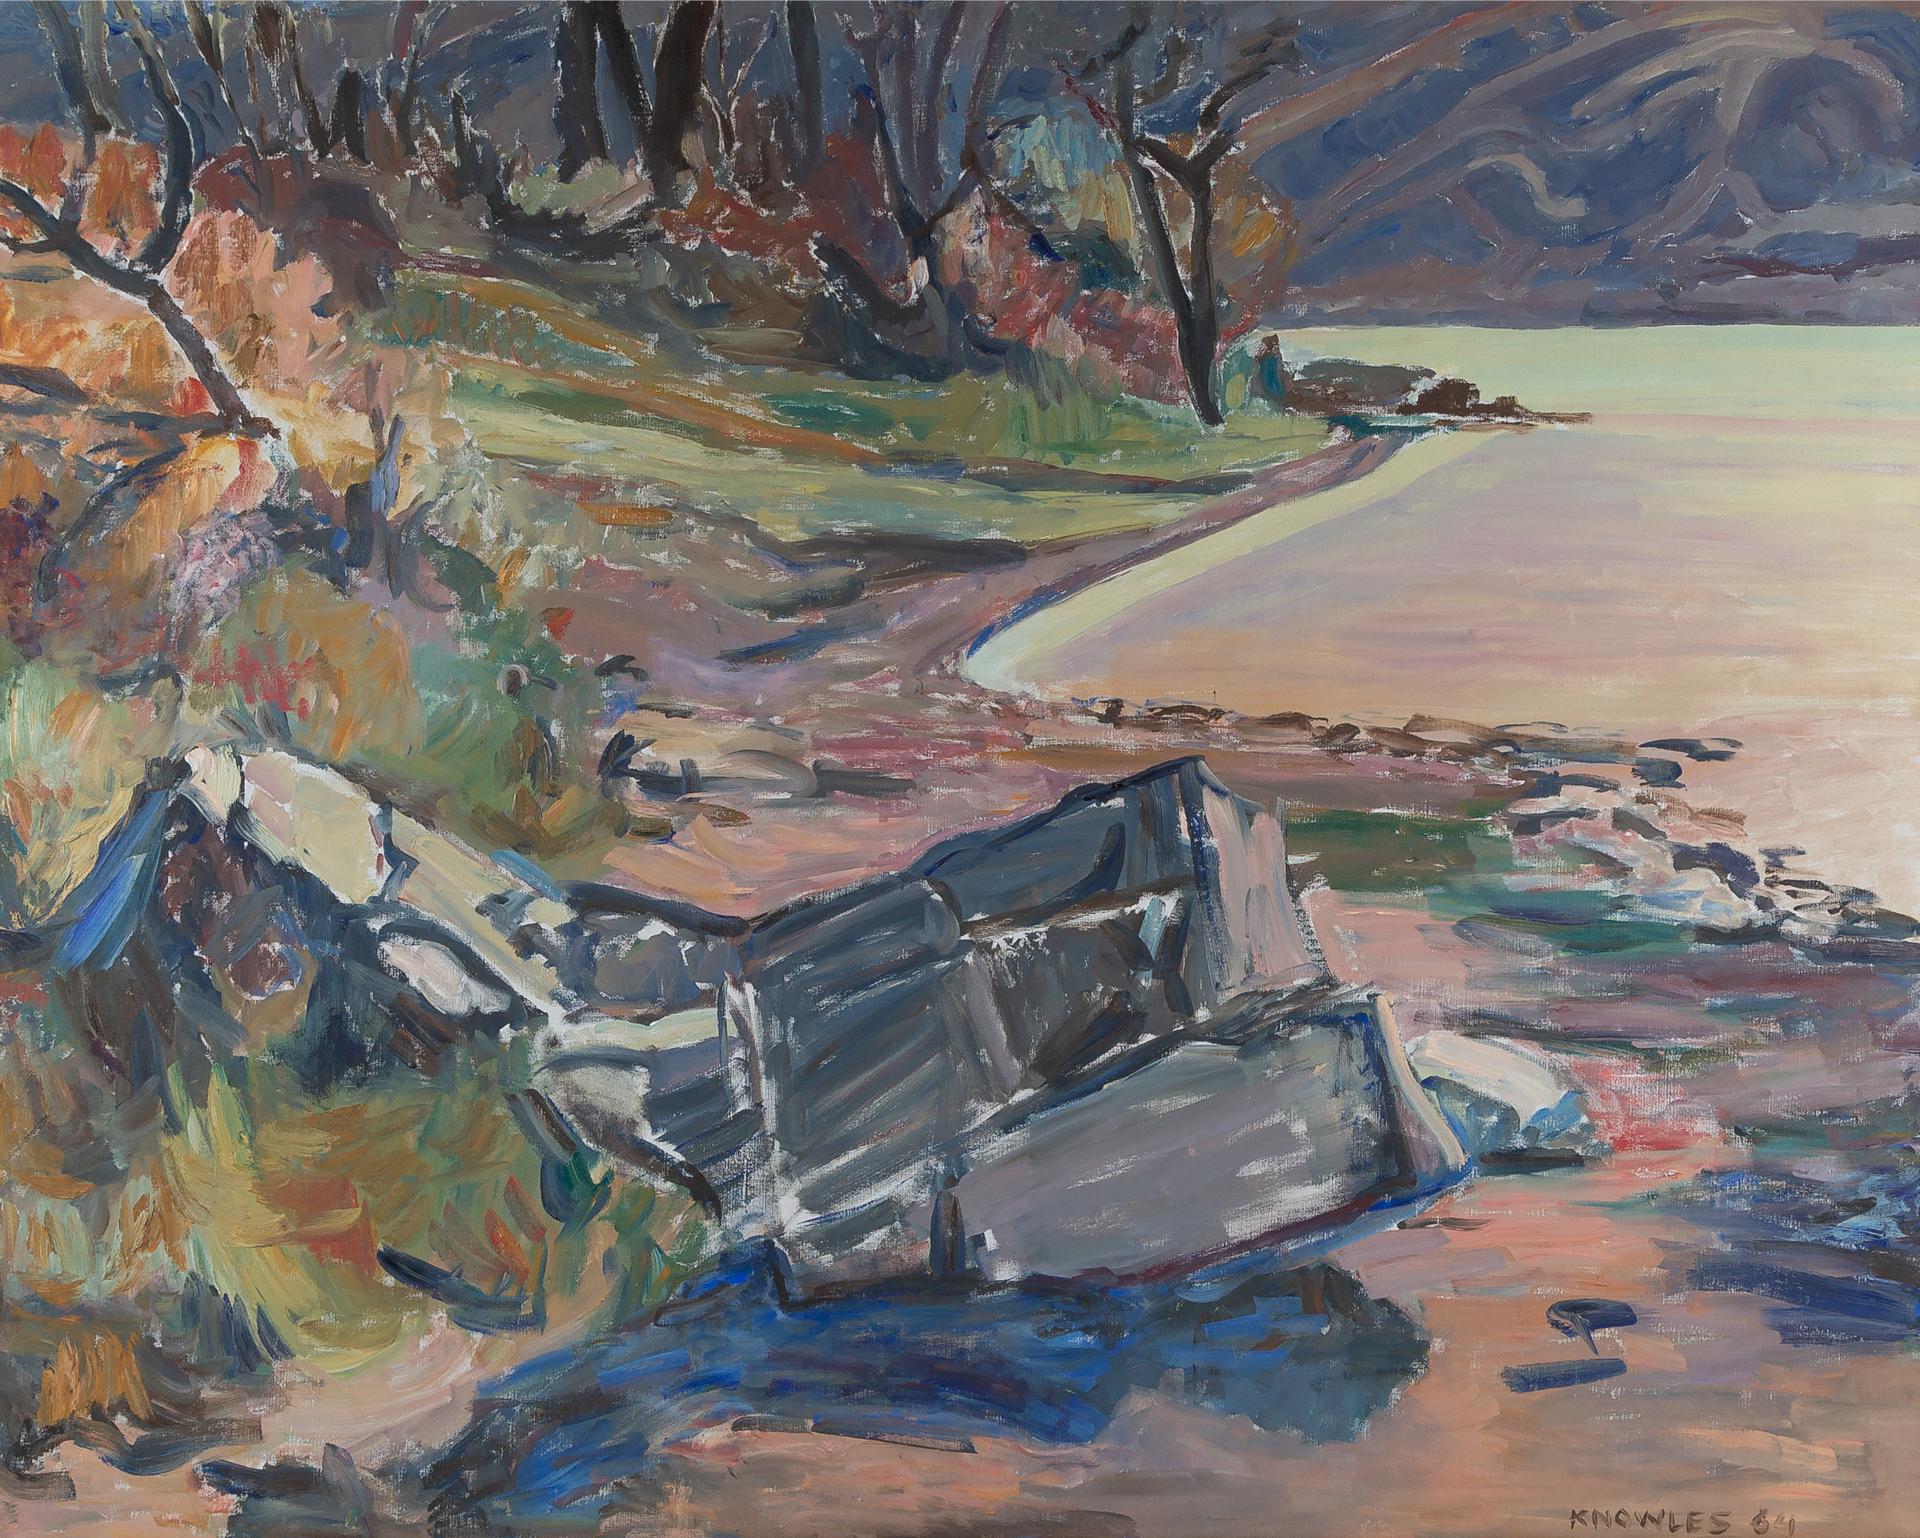 Dorothy Elsie Knowles (1927-2001) - Views Of The Qu'appelle Valley, Rocks On The Lakeshore, 1963